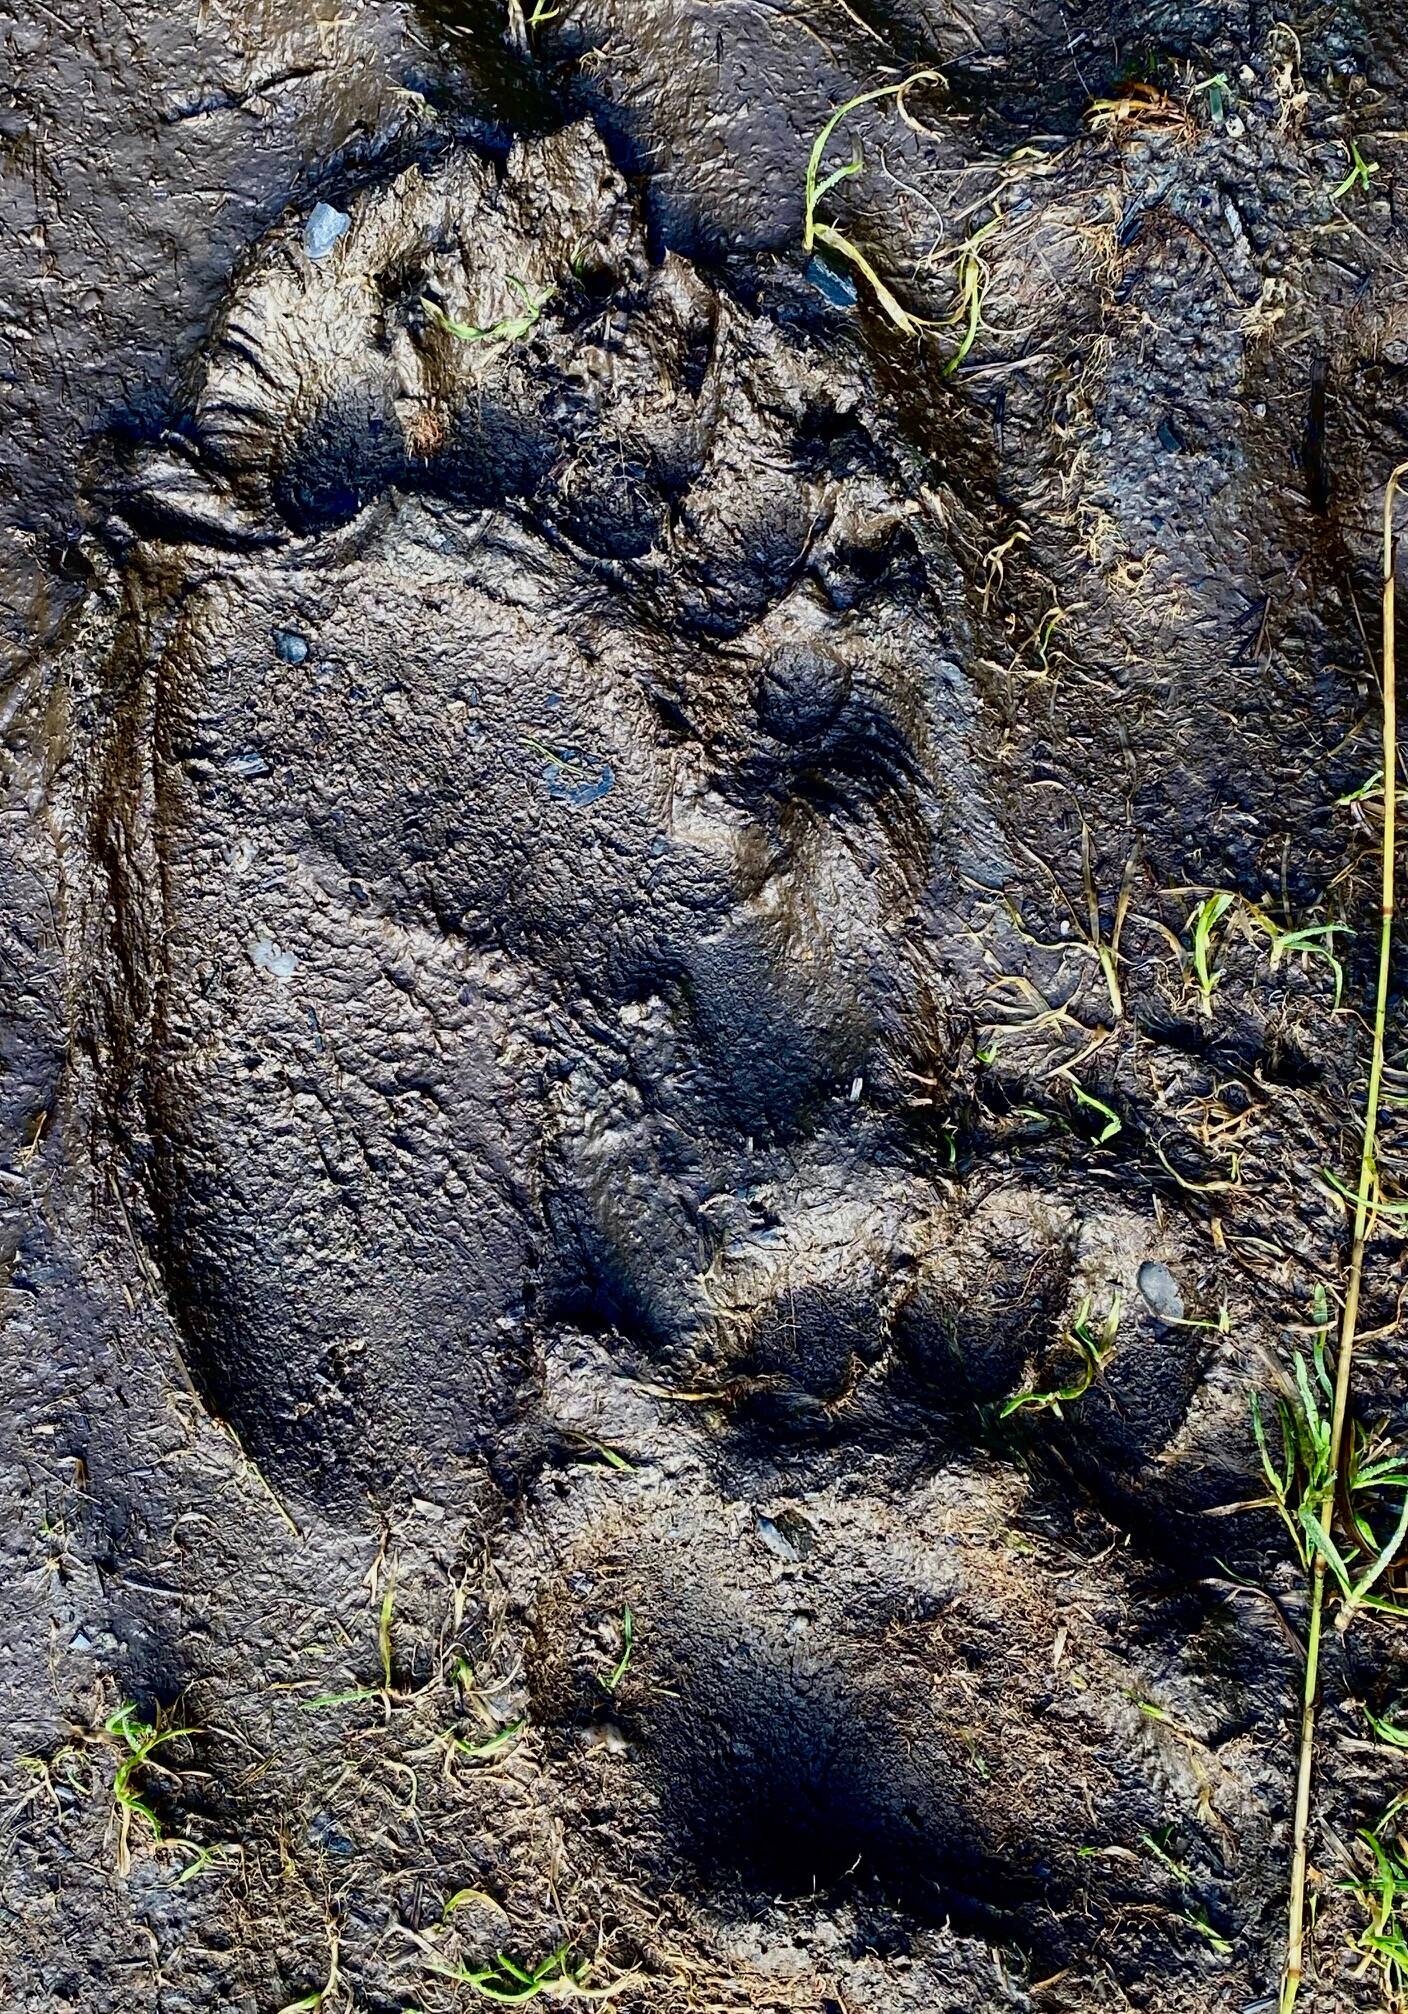 Bear tracks on a muddy trail in Cowee Meadow are seen in late September. (Courtesy Photo / Denise Carroll)